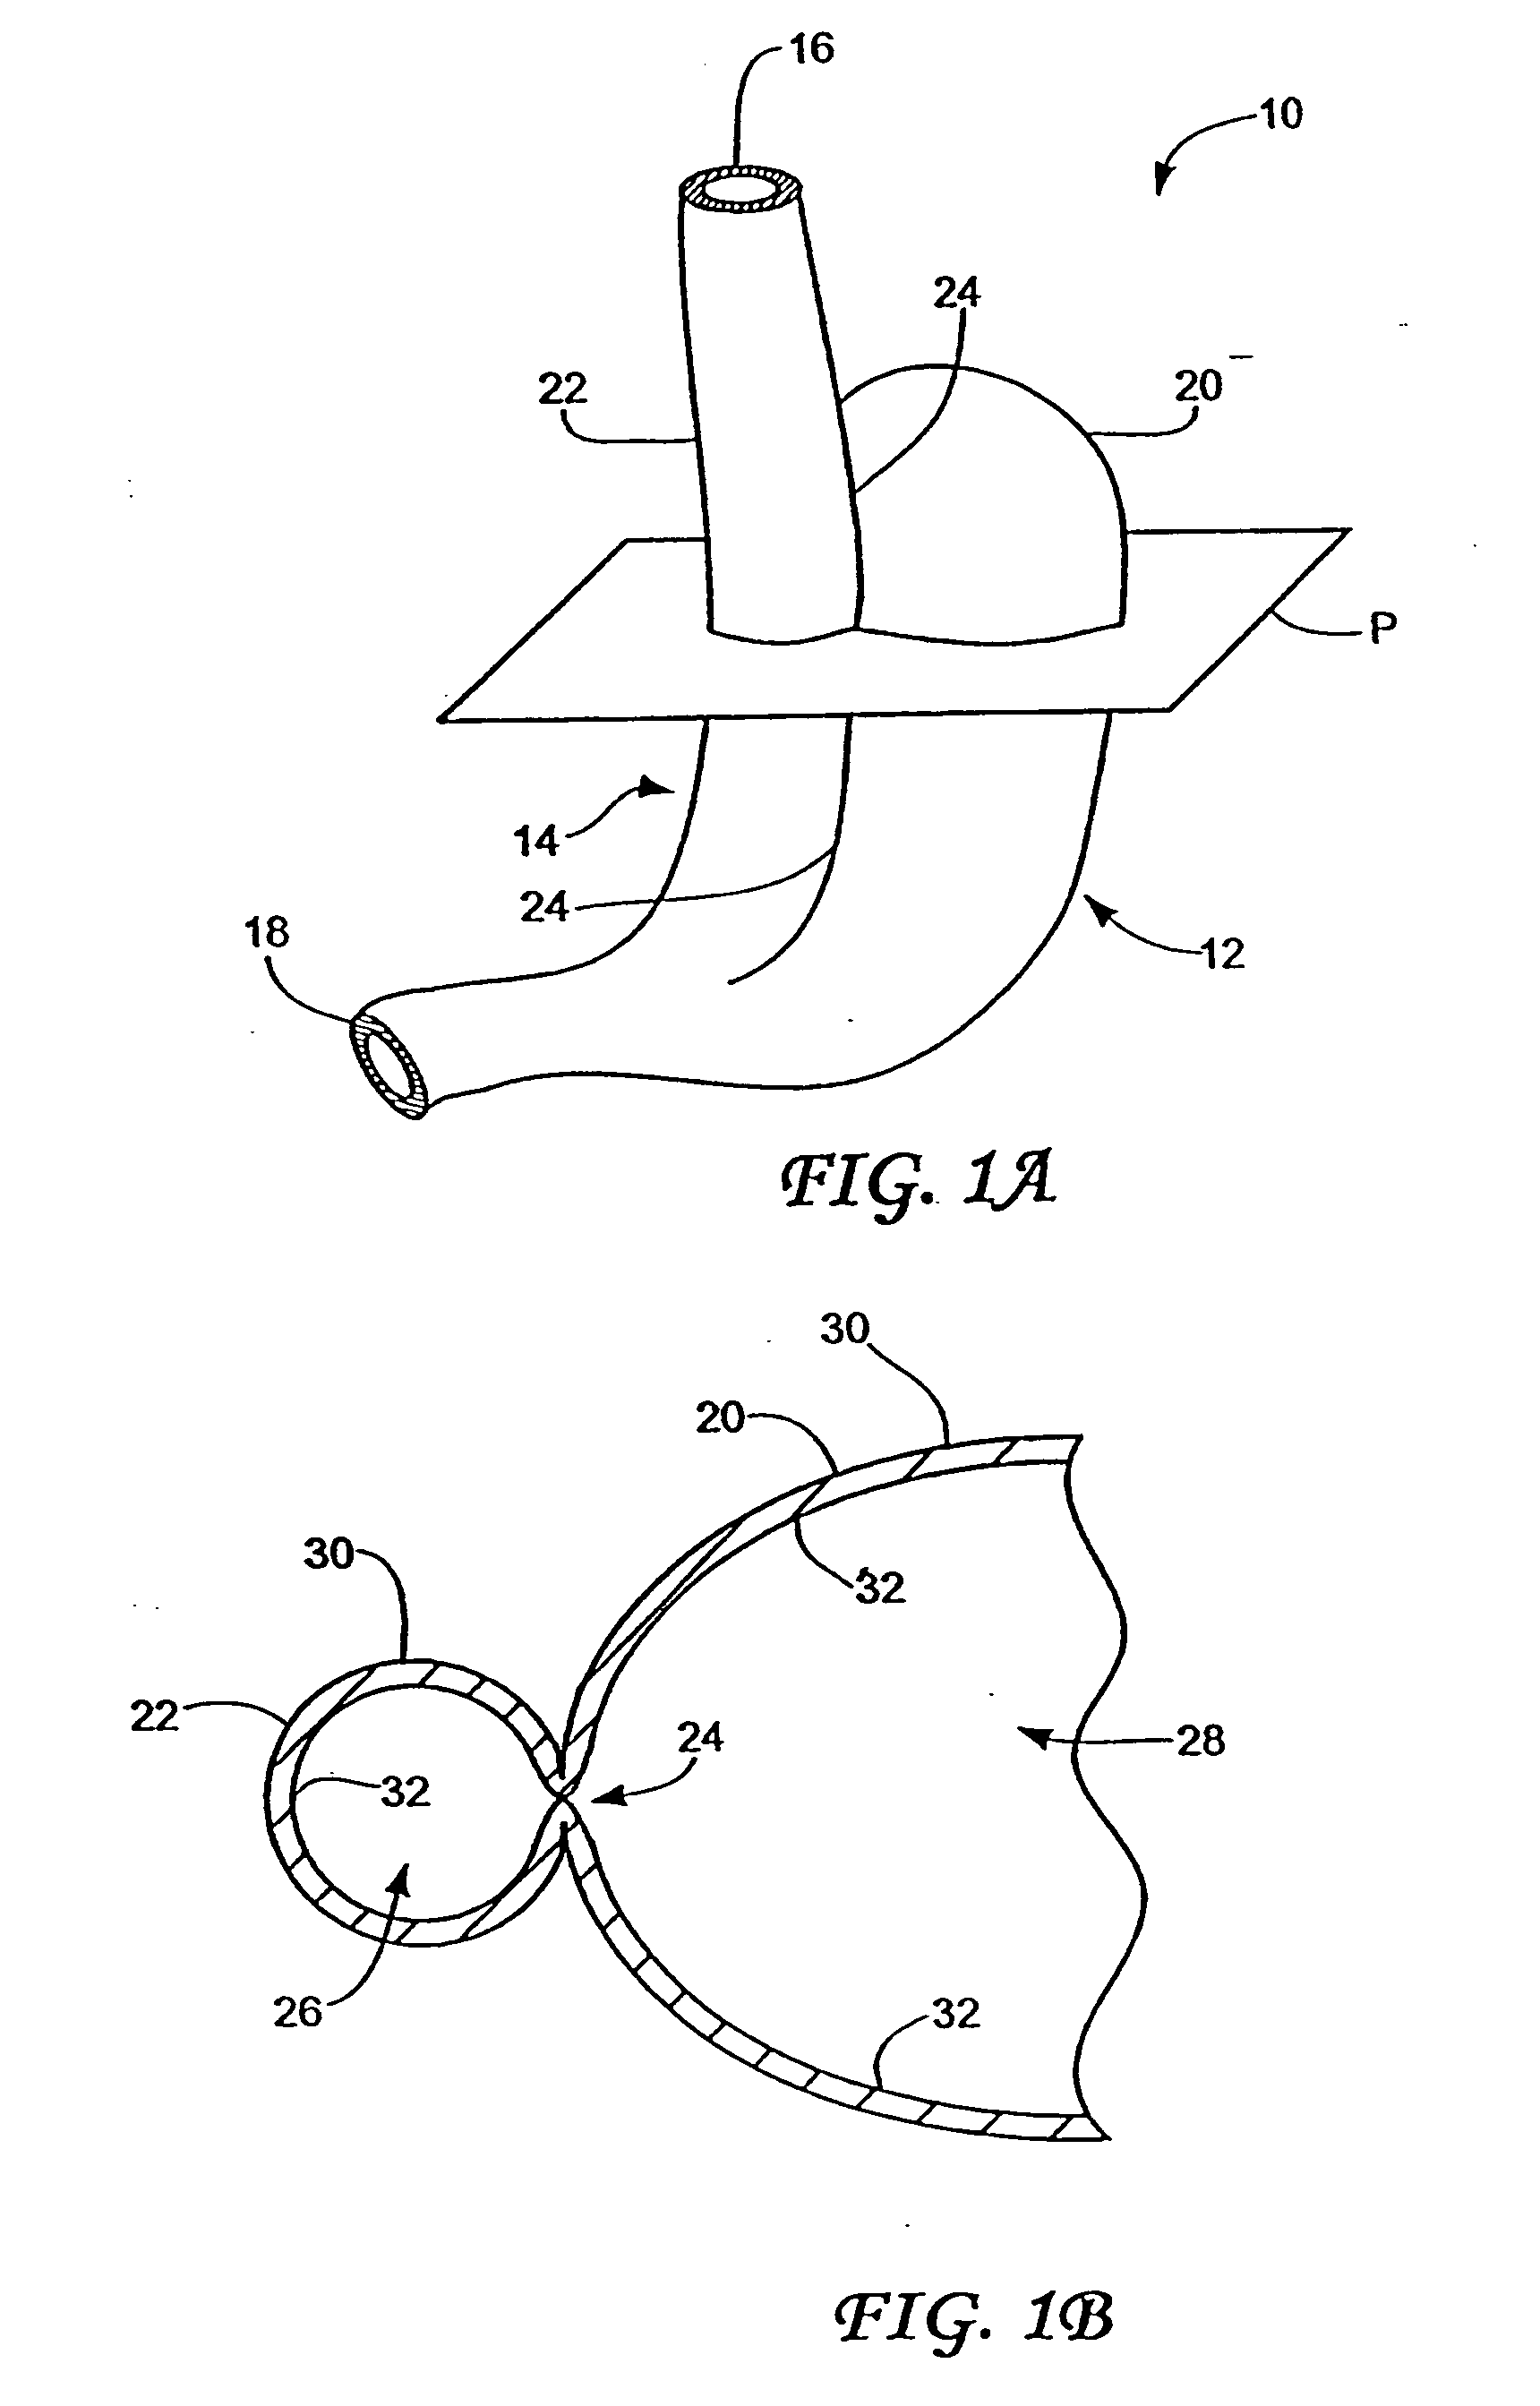 Obesity treatment tools and methods